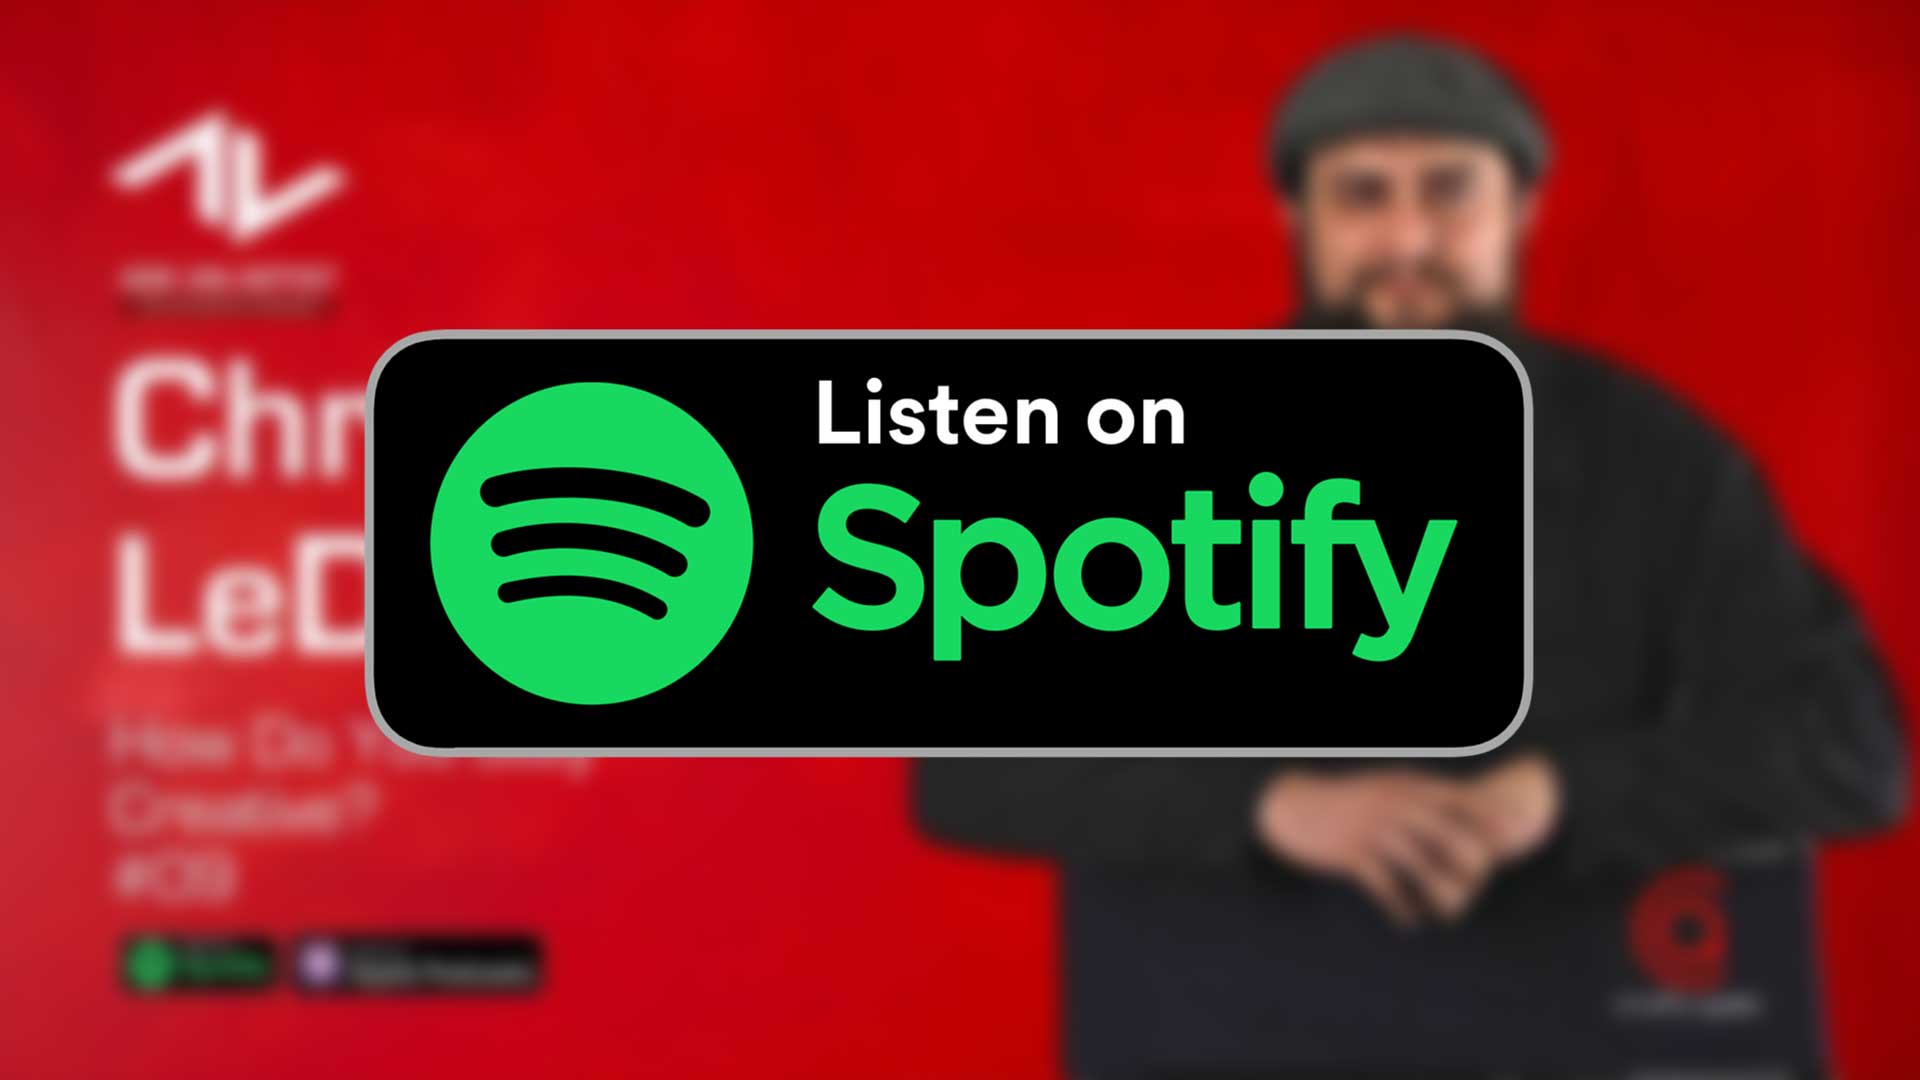 Listen to episode 9 of Ask An Artist on Spotify.